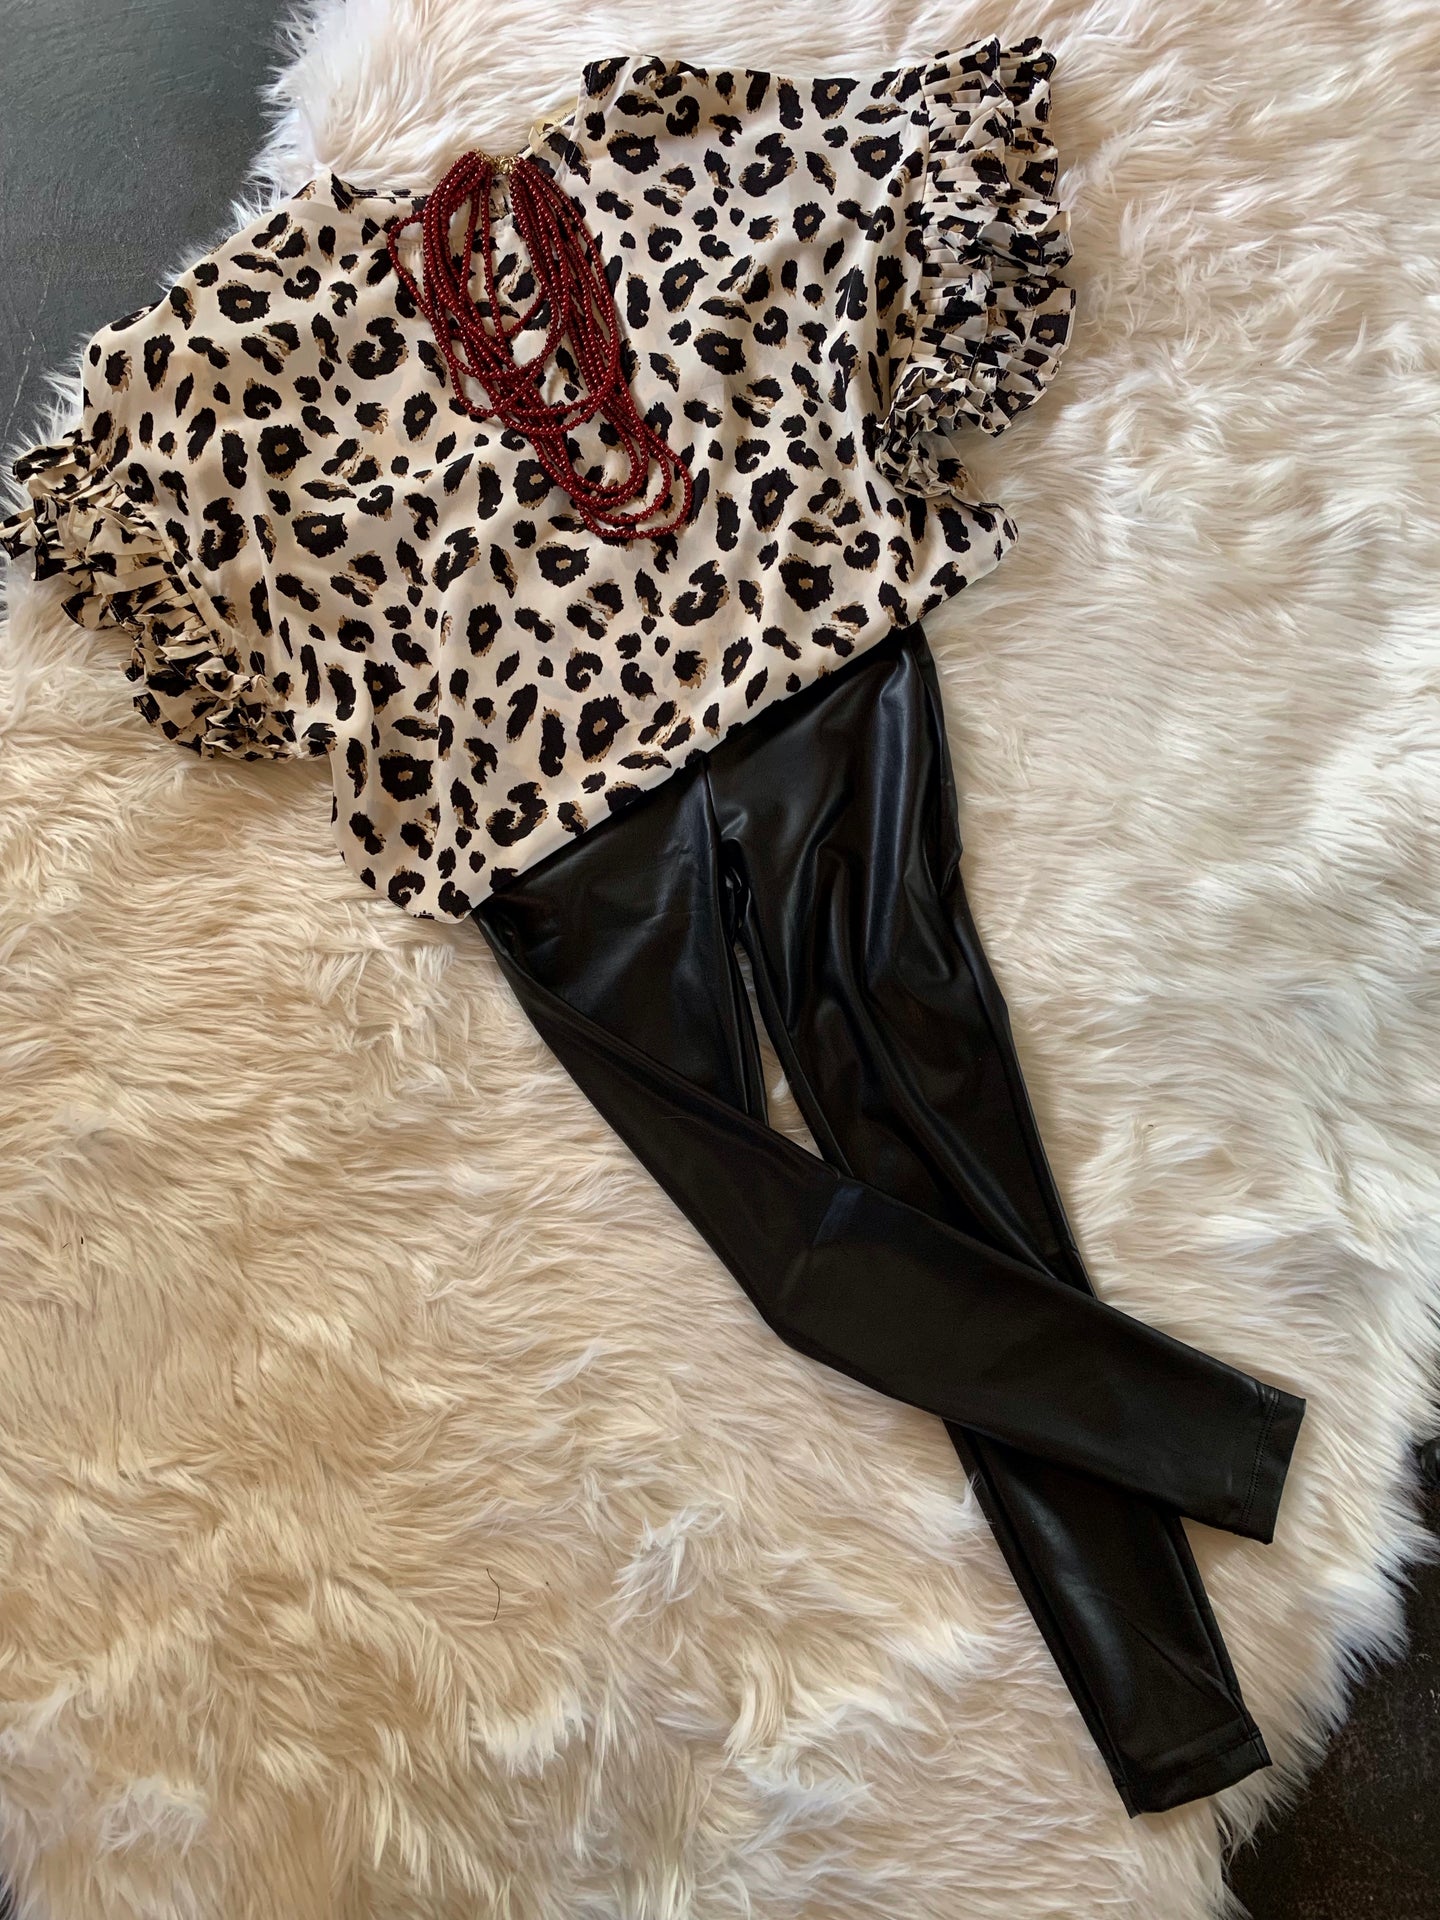 Off White Leopard Top